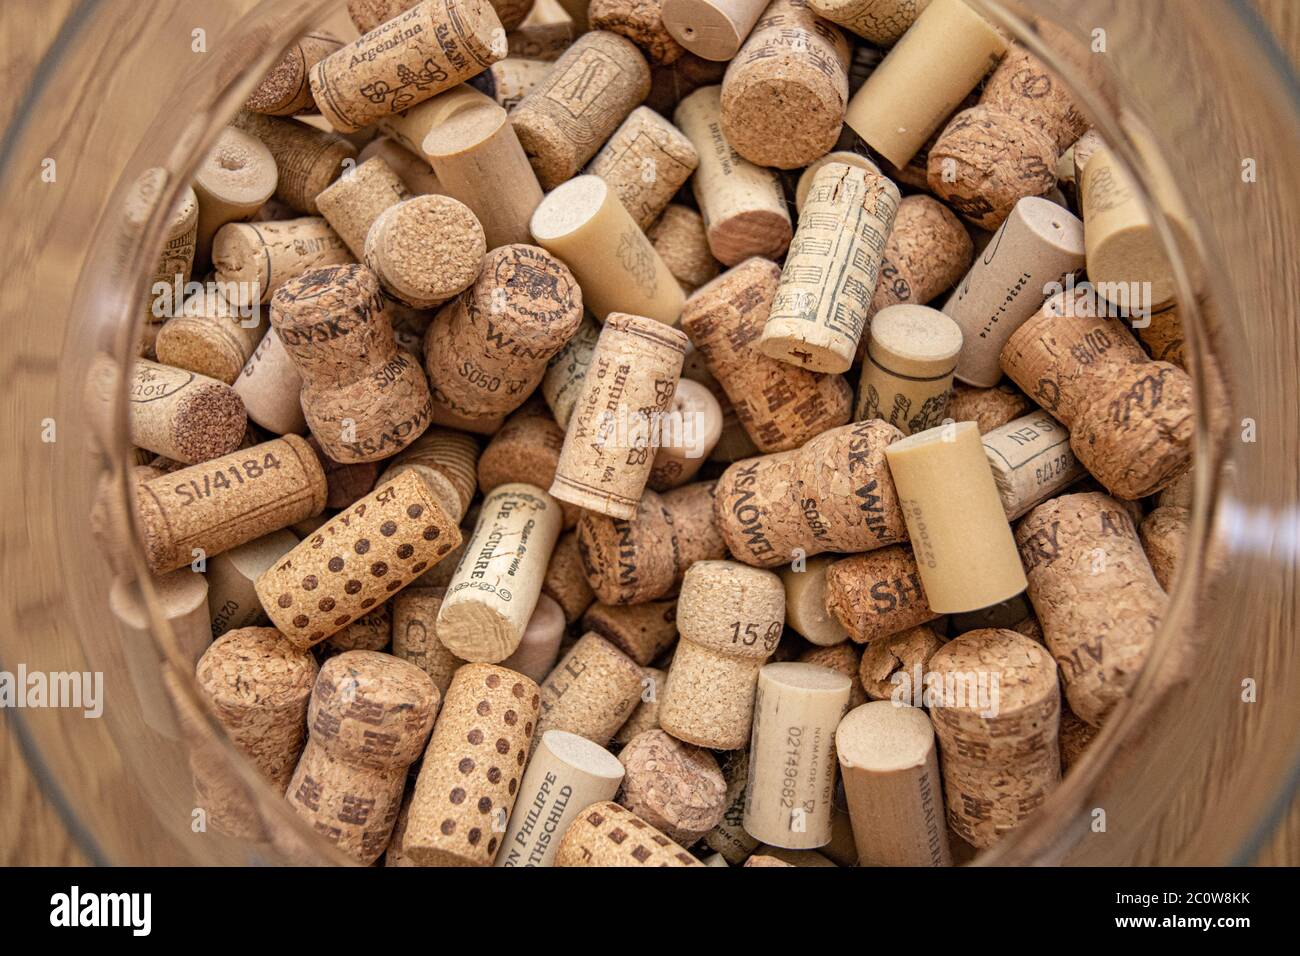 Top view of round glass vase neck with used wine cork stoppers inside. Pile of various wine bottle corks for winery background Stock Photo